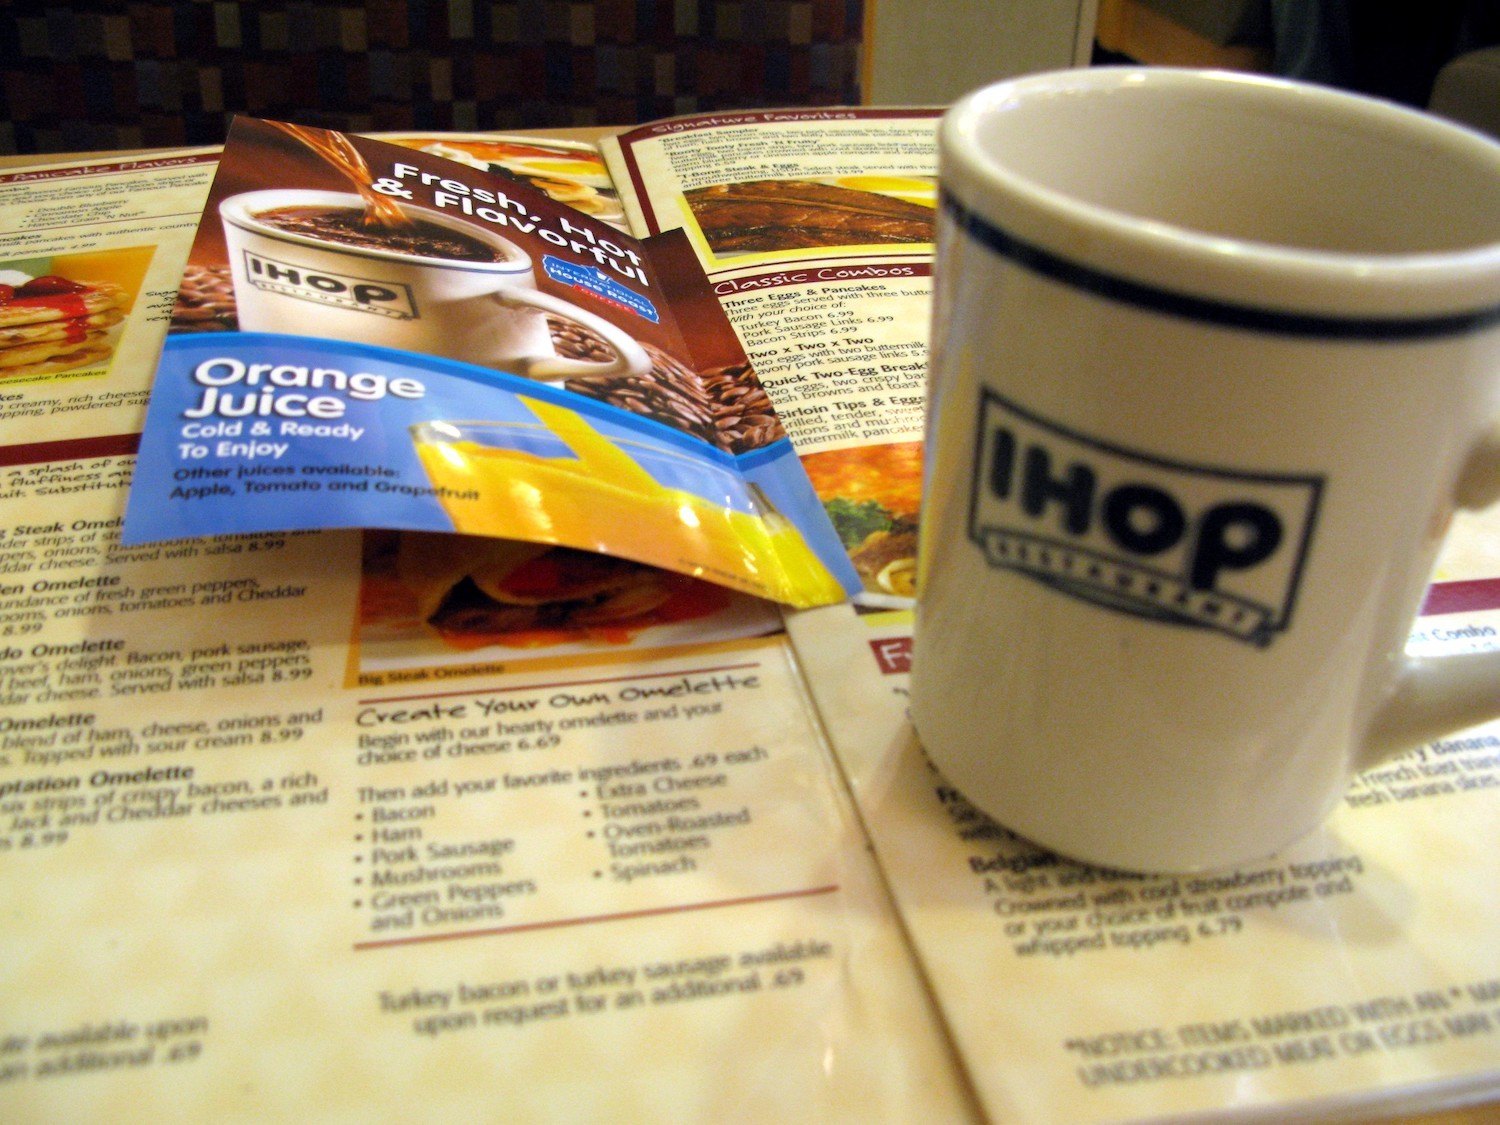 An open multi-page IHOP menu with a coffee mug on the right.